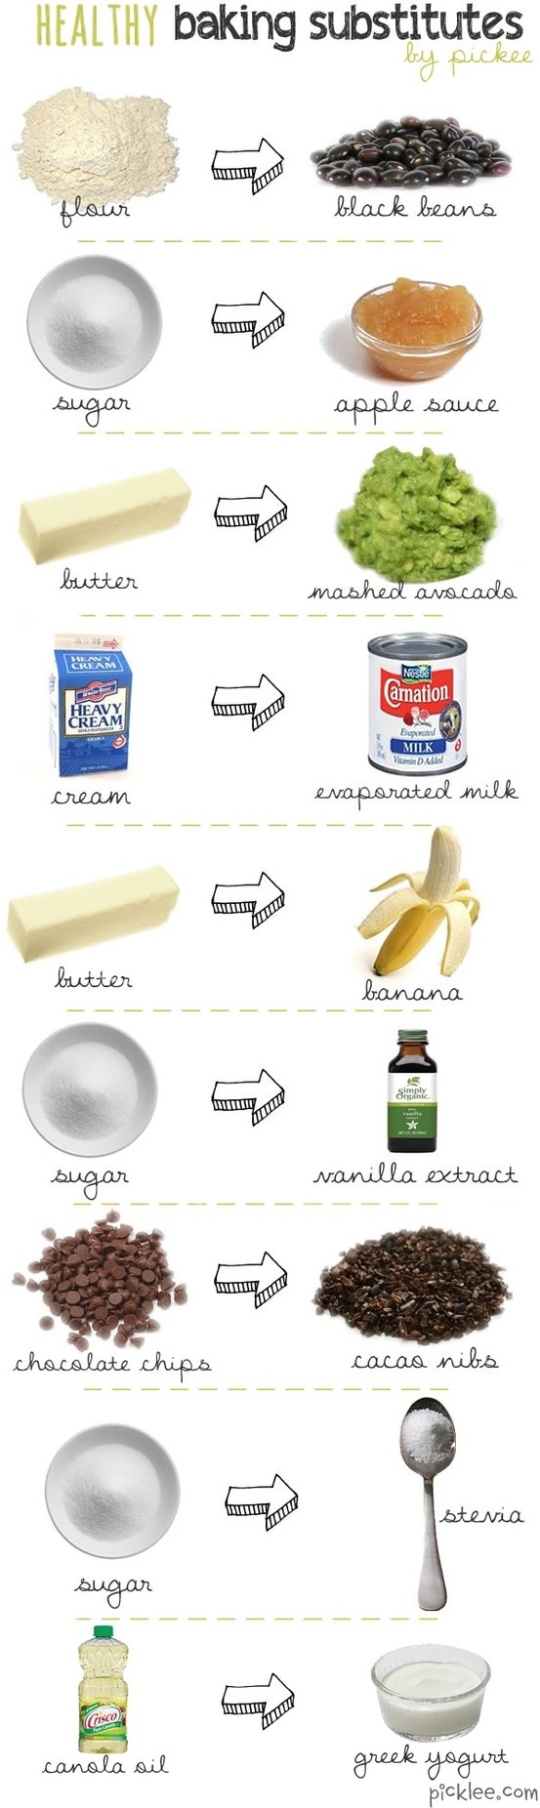 Healthy Baking Substitutes!